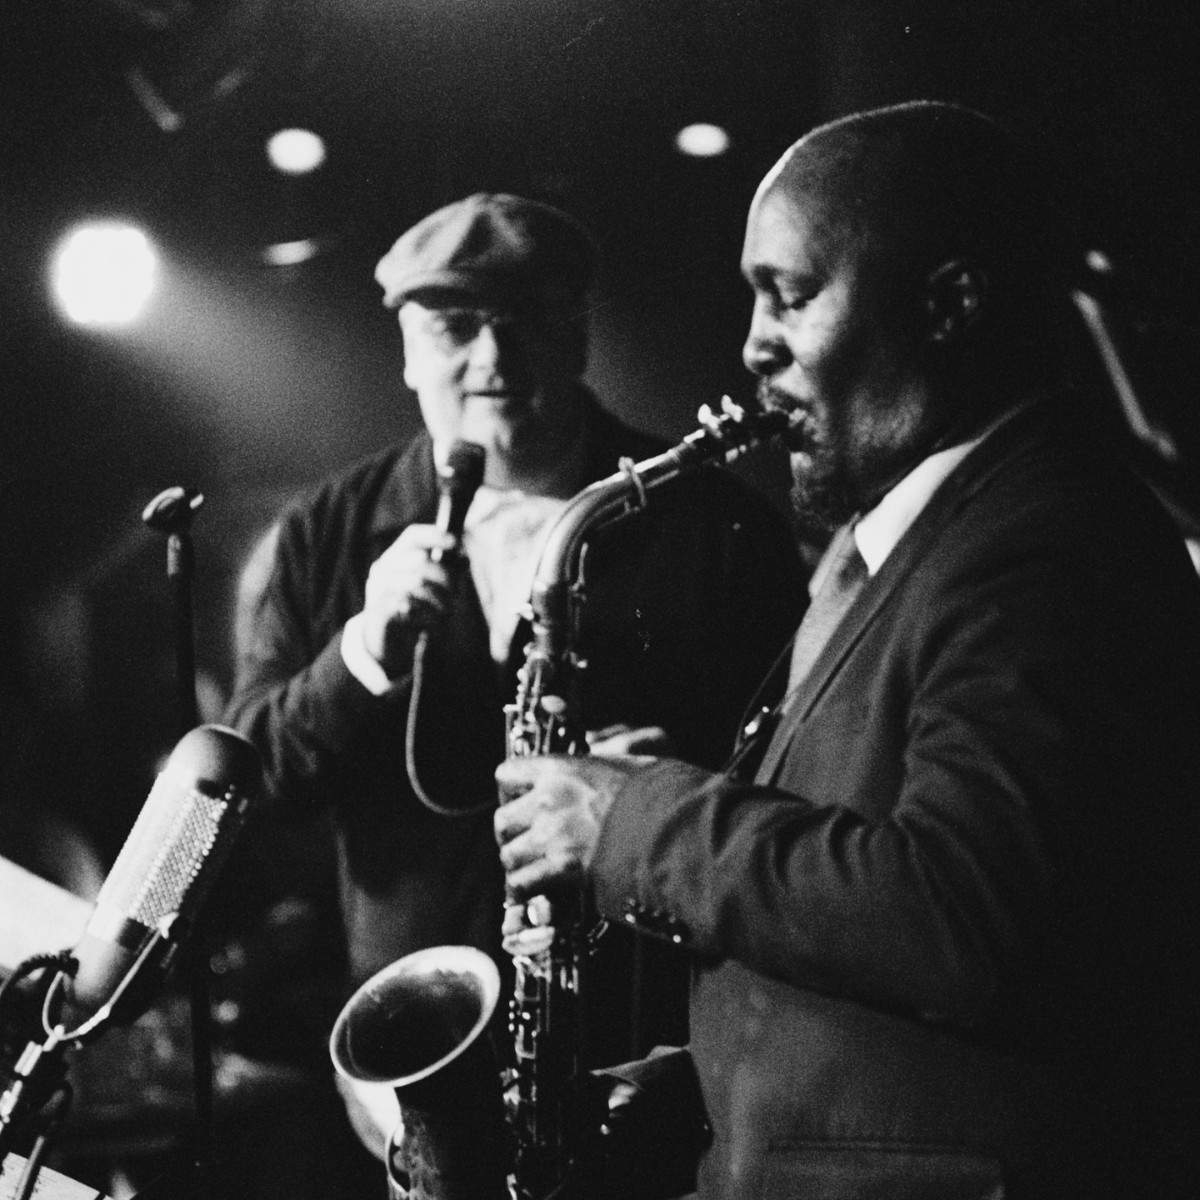 We're excited for this stunning PX Records release! 📣 ✨ ' @ianshawjazz and @tonykofi - at PizzaExpress Live in London' is available on all streaming platforms from 26 April. Pre-order your copy on CD and vinyl via the link below. 💿 shop.pizzaexpresslive.com